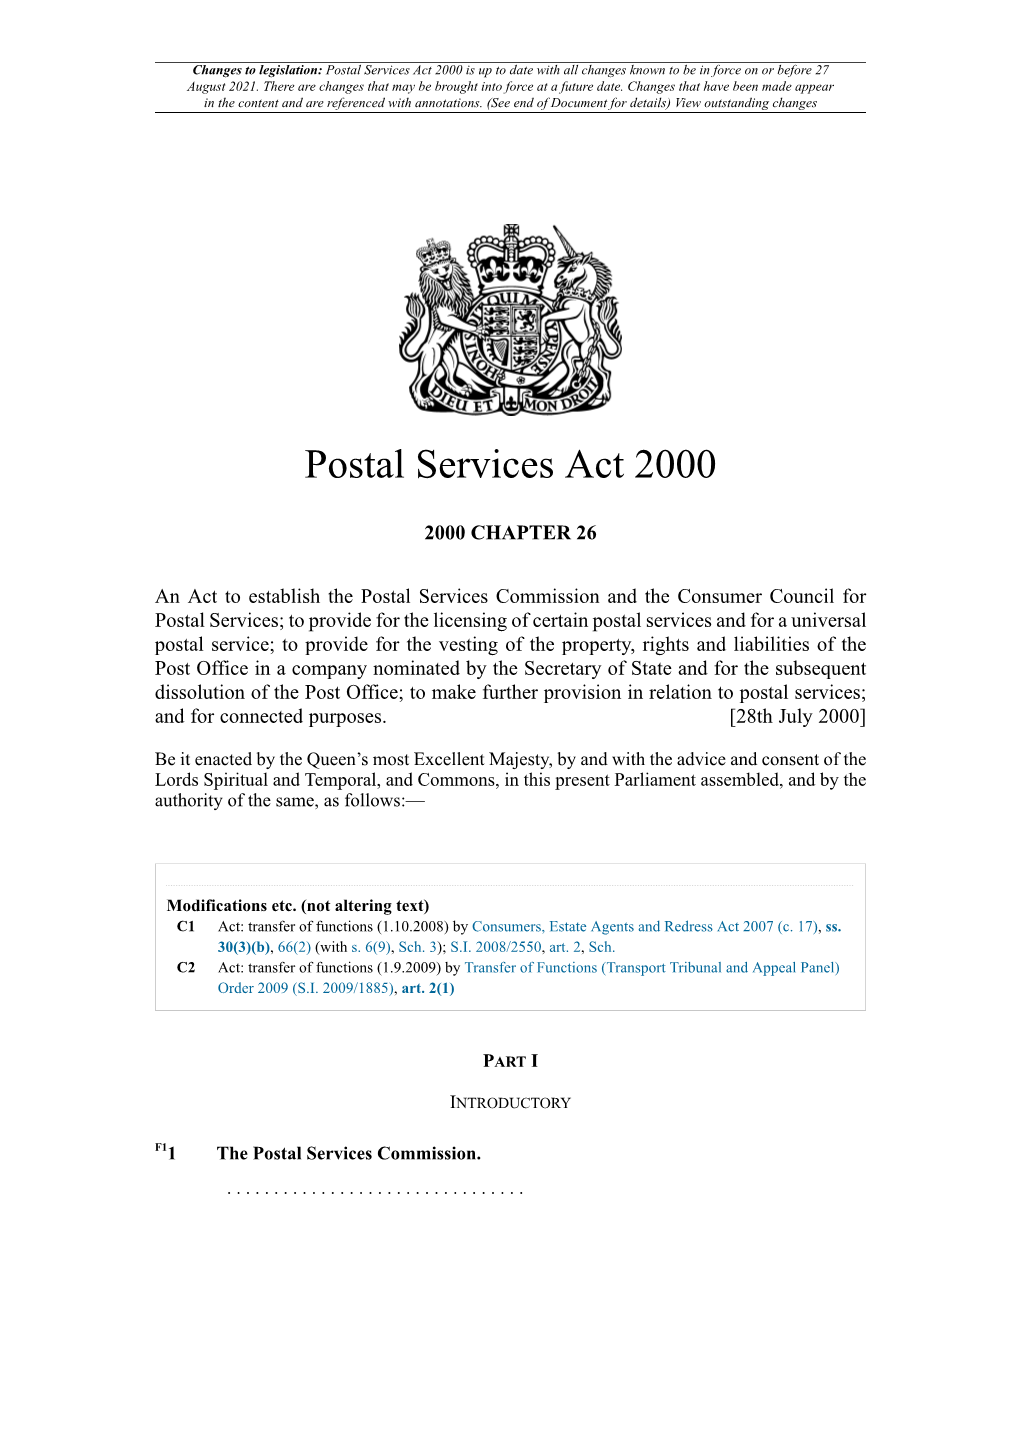 Postal Services Act 2000 Is up to Date with All Changes Known to Be in Force on Or Before 27 August 2021